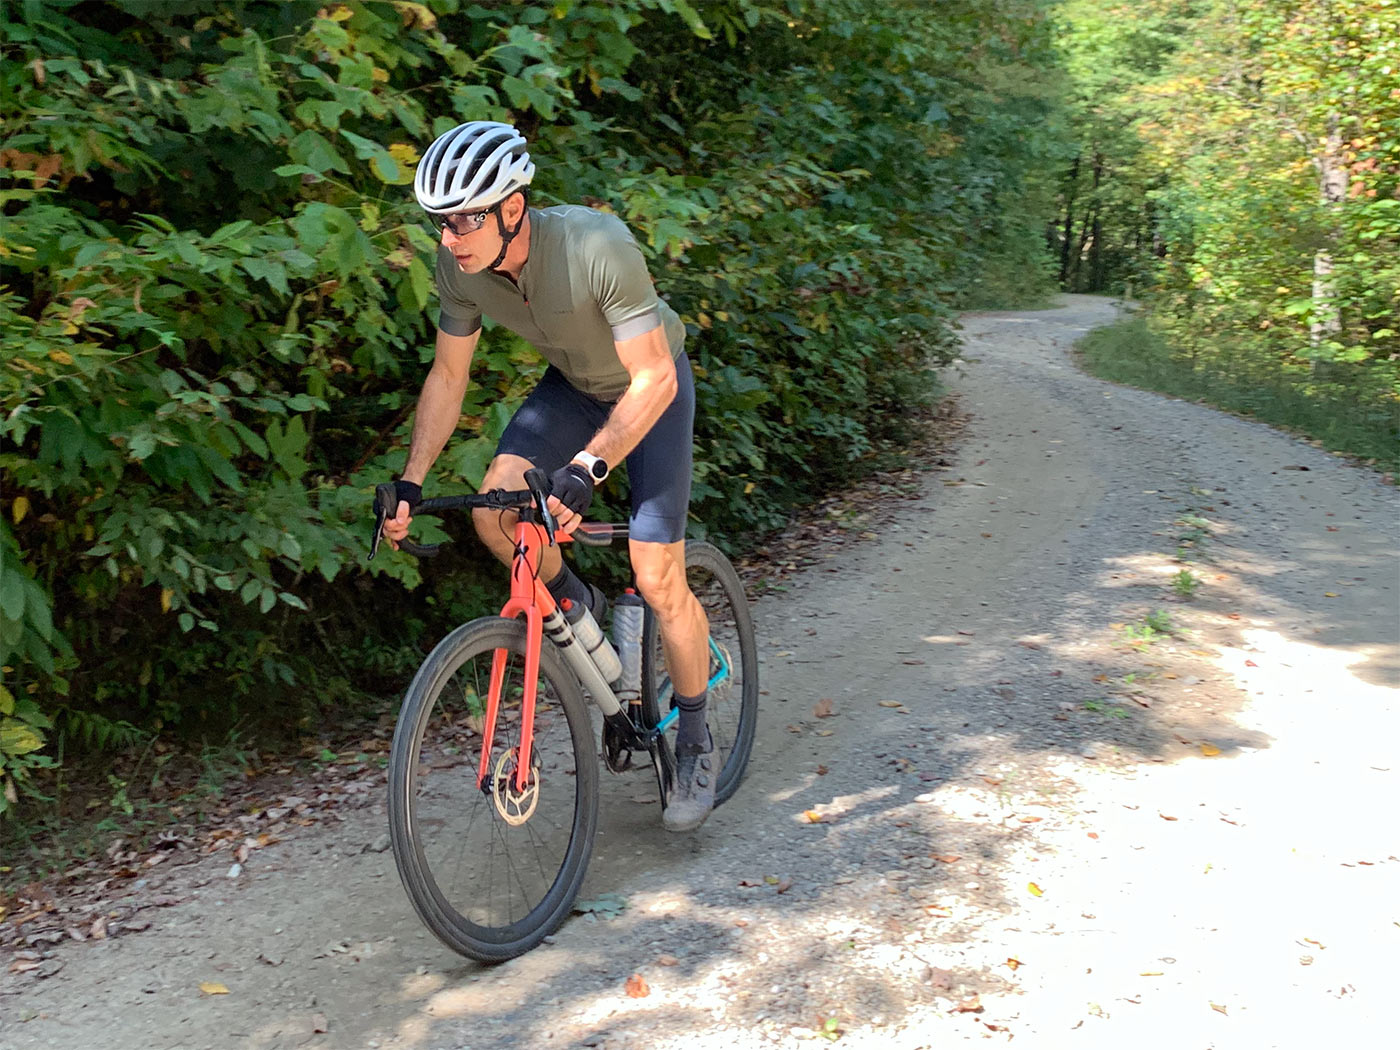 tyler riding the specialized crux worlds lightest gravel bike at maple sally